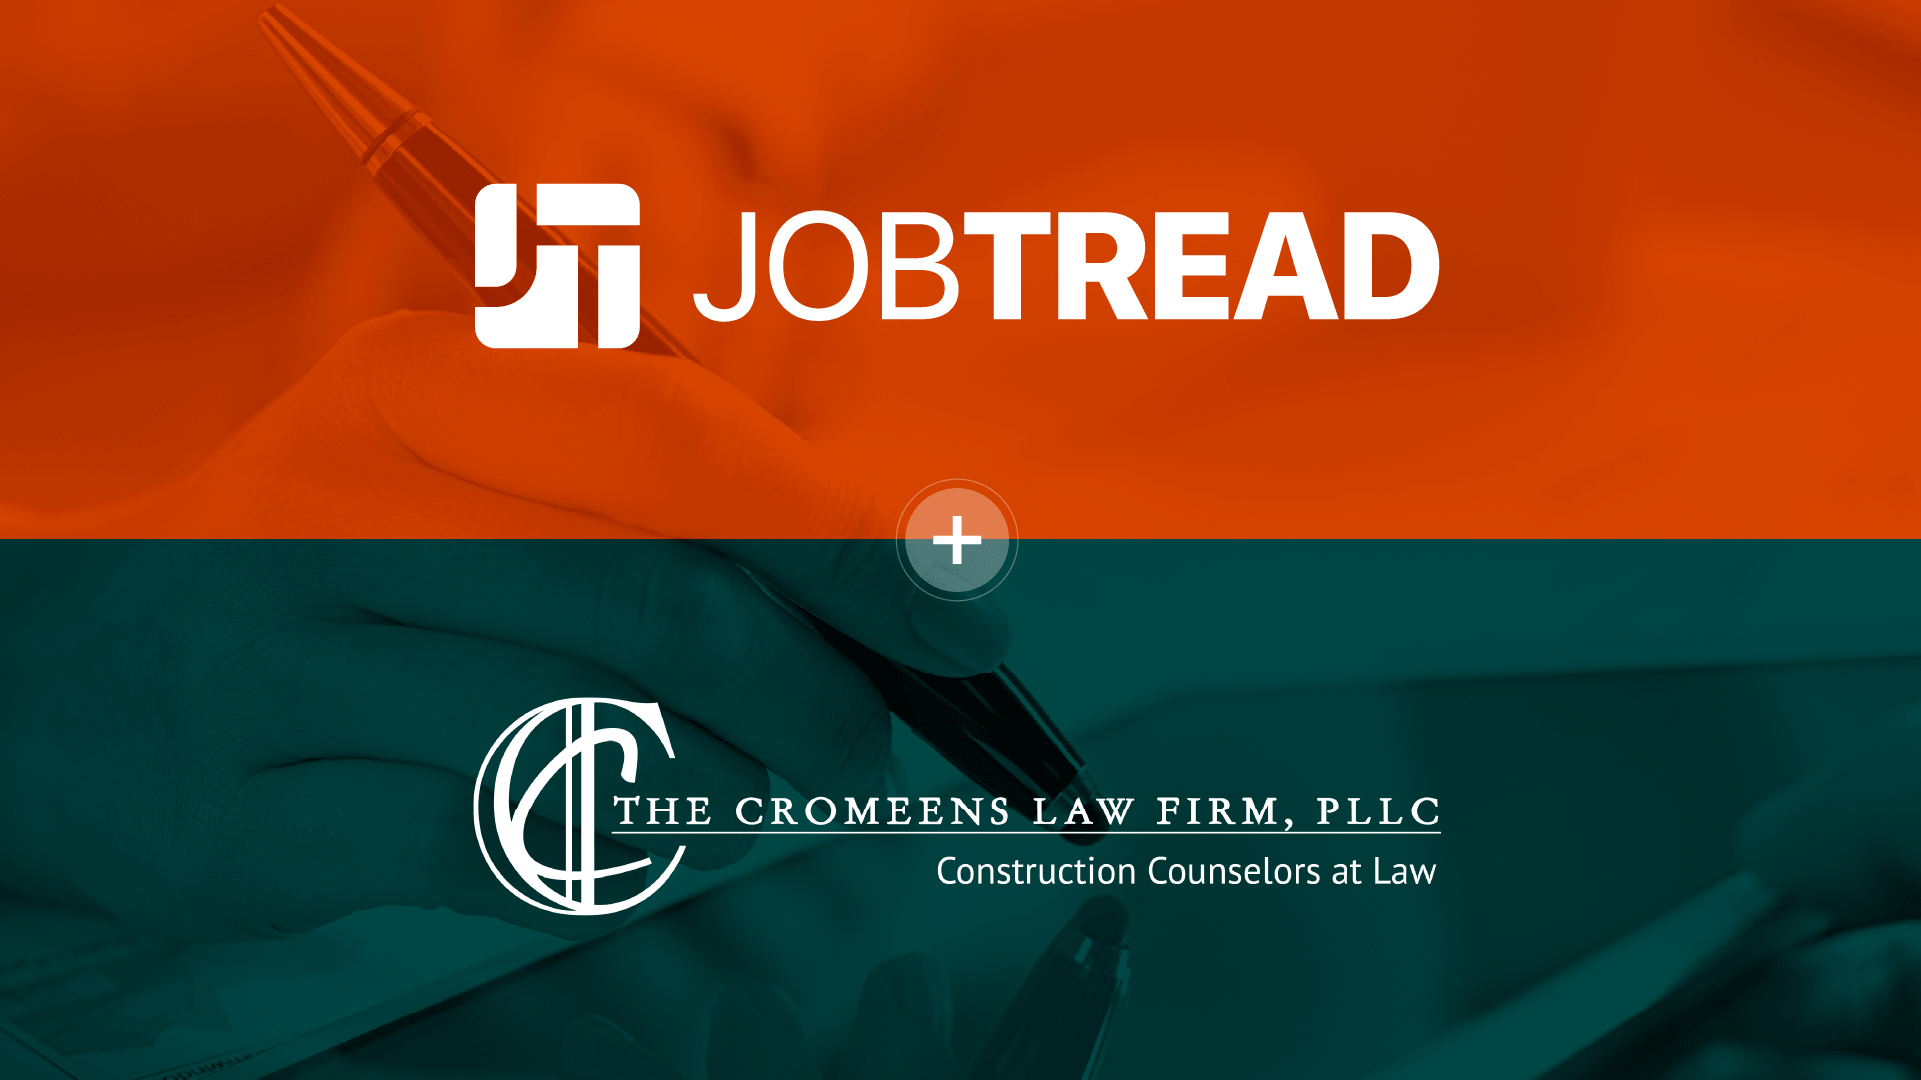 JobTread Software for All Devices